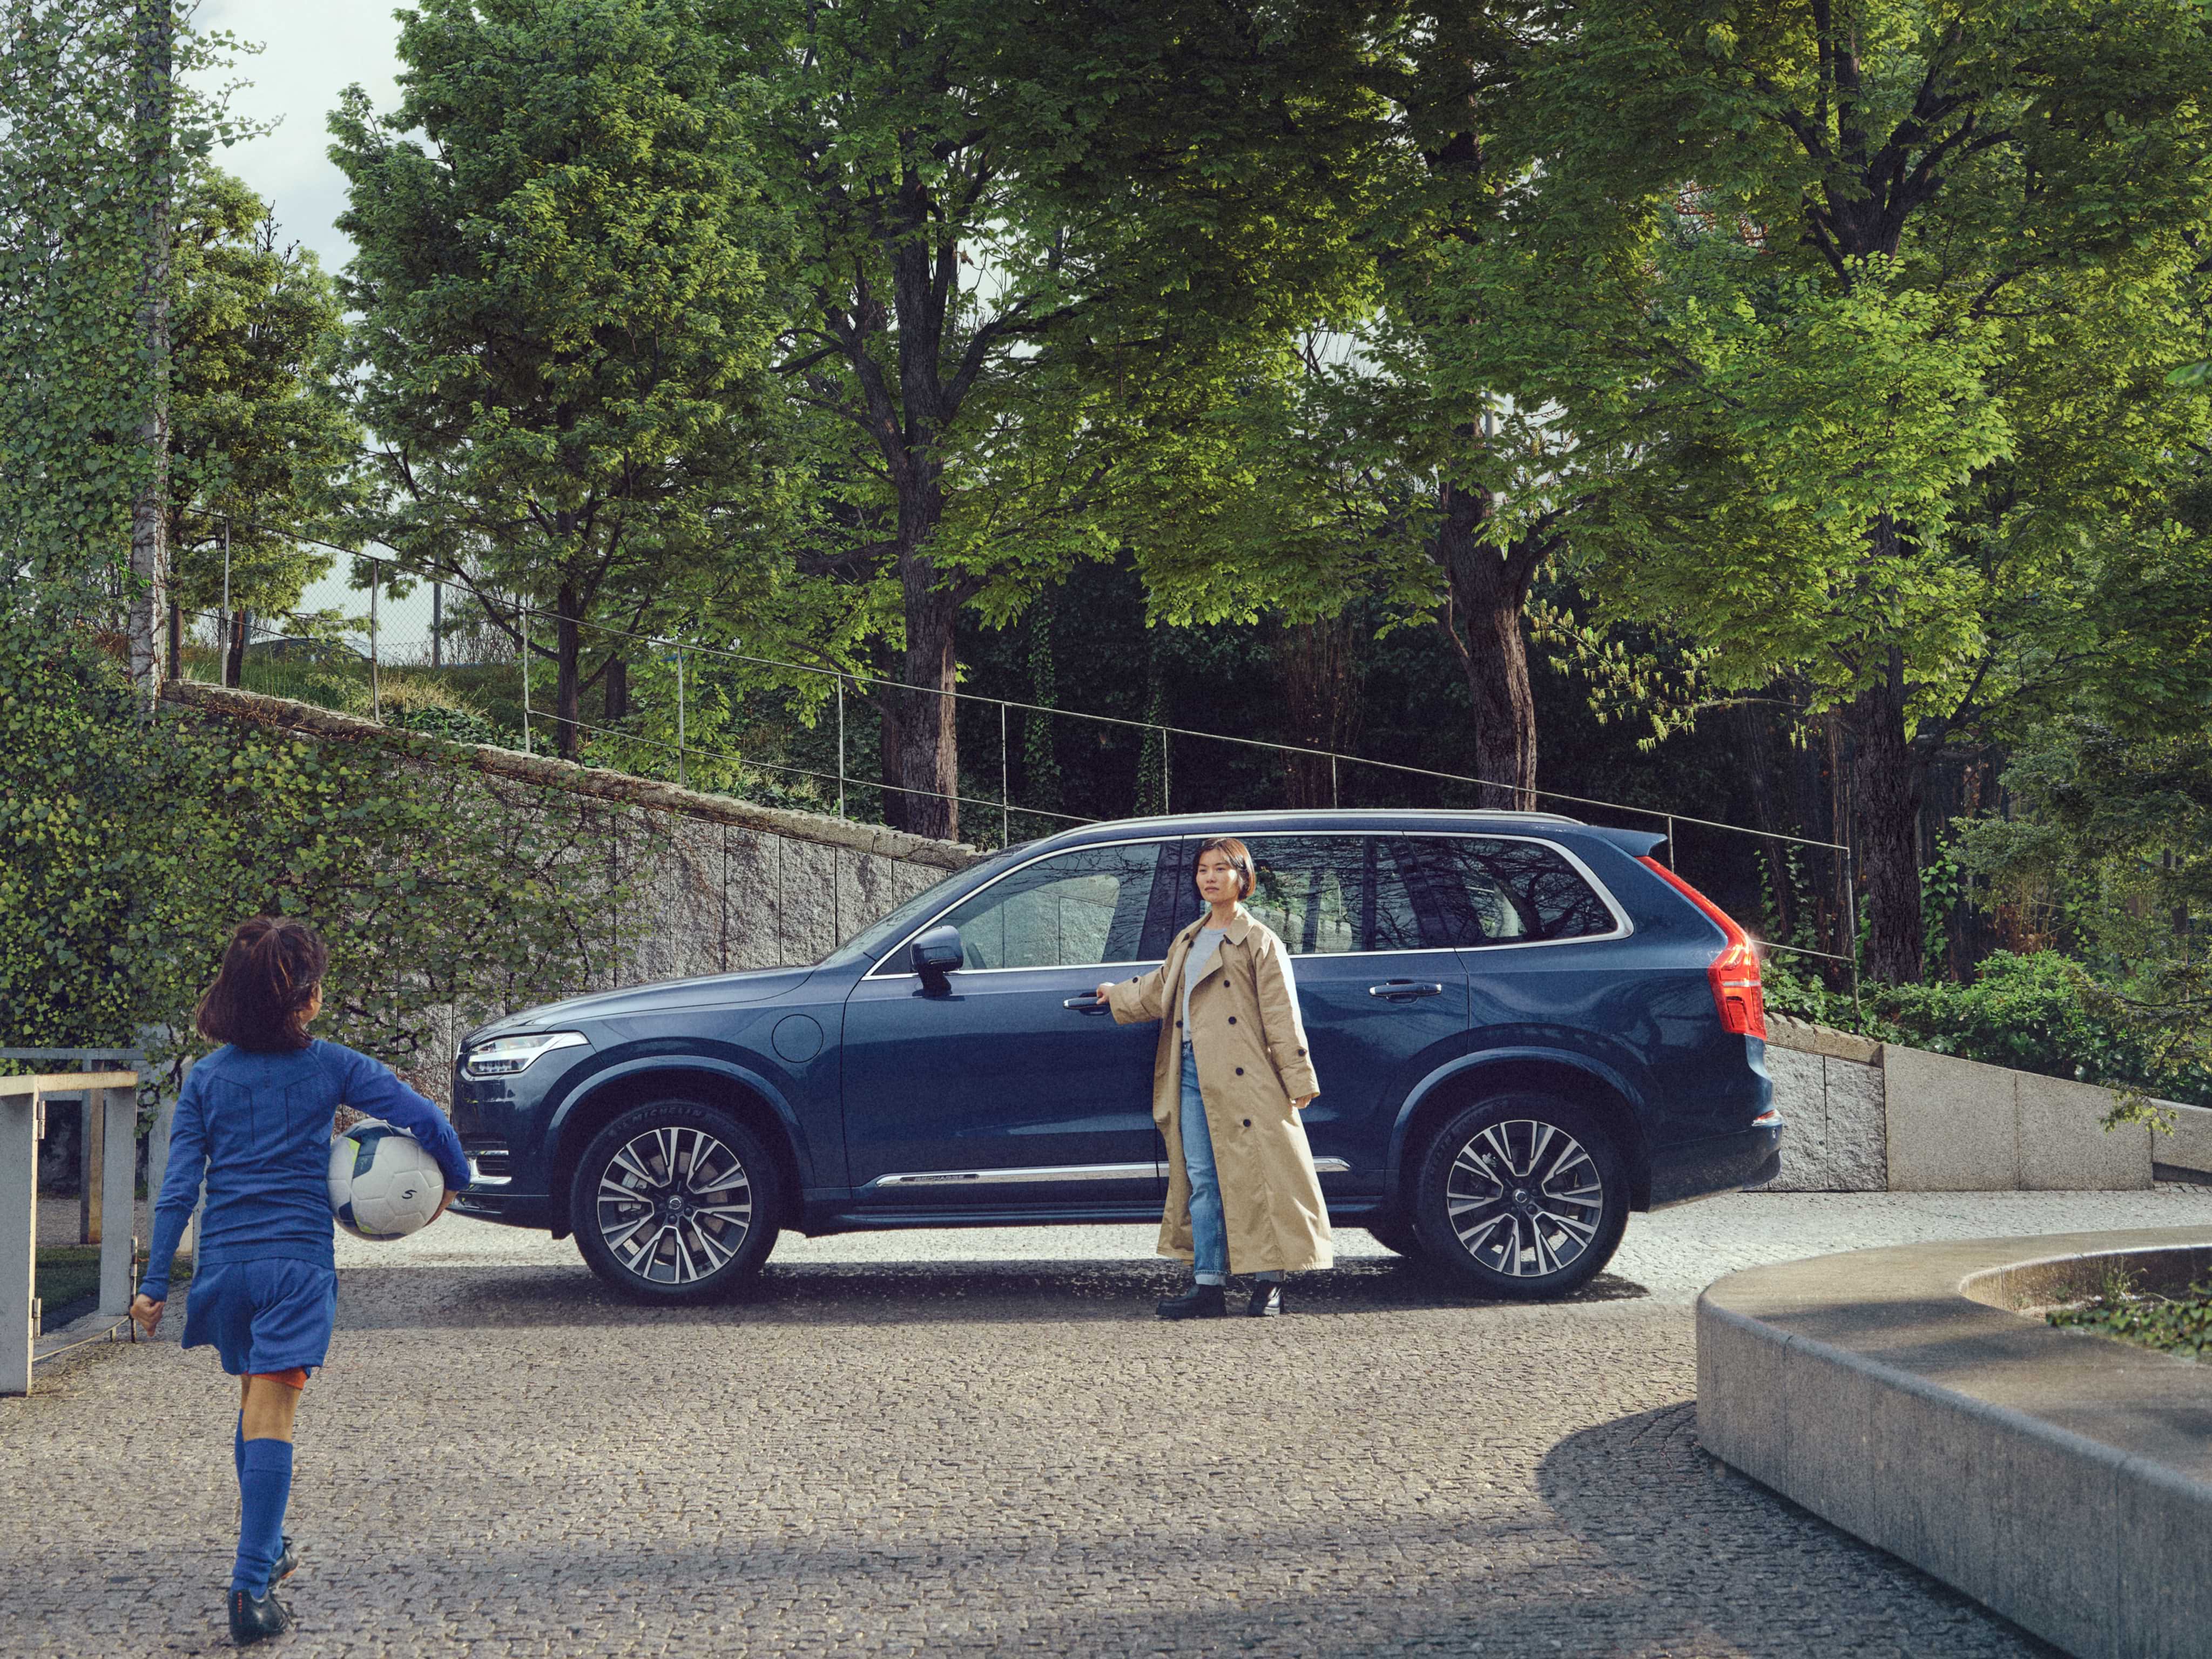 A mother stands near her Denim Blue Volvo XC90 as her daughter approaches, dressed for soccer practice and holding a ball.